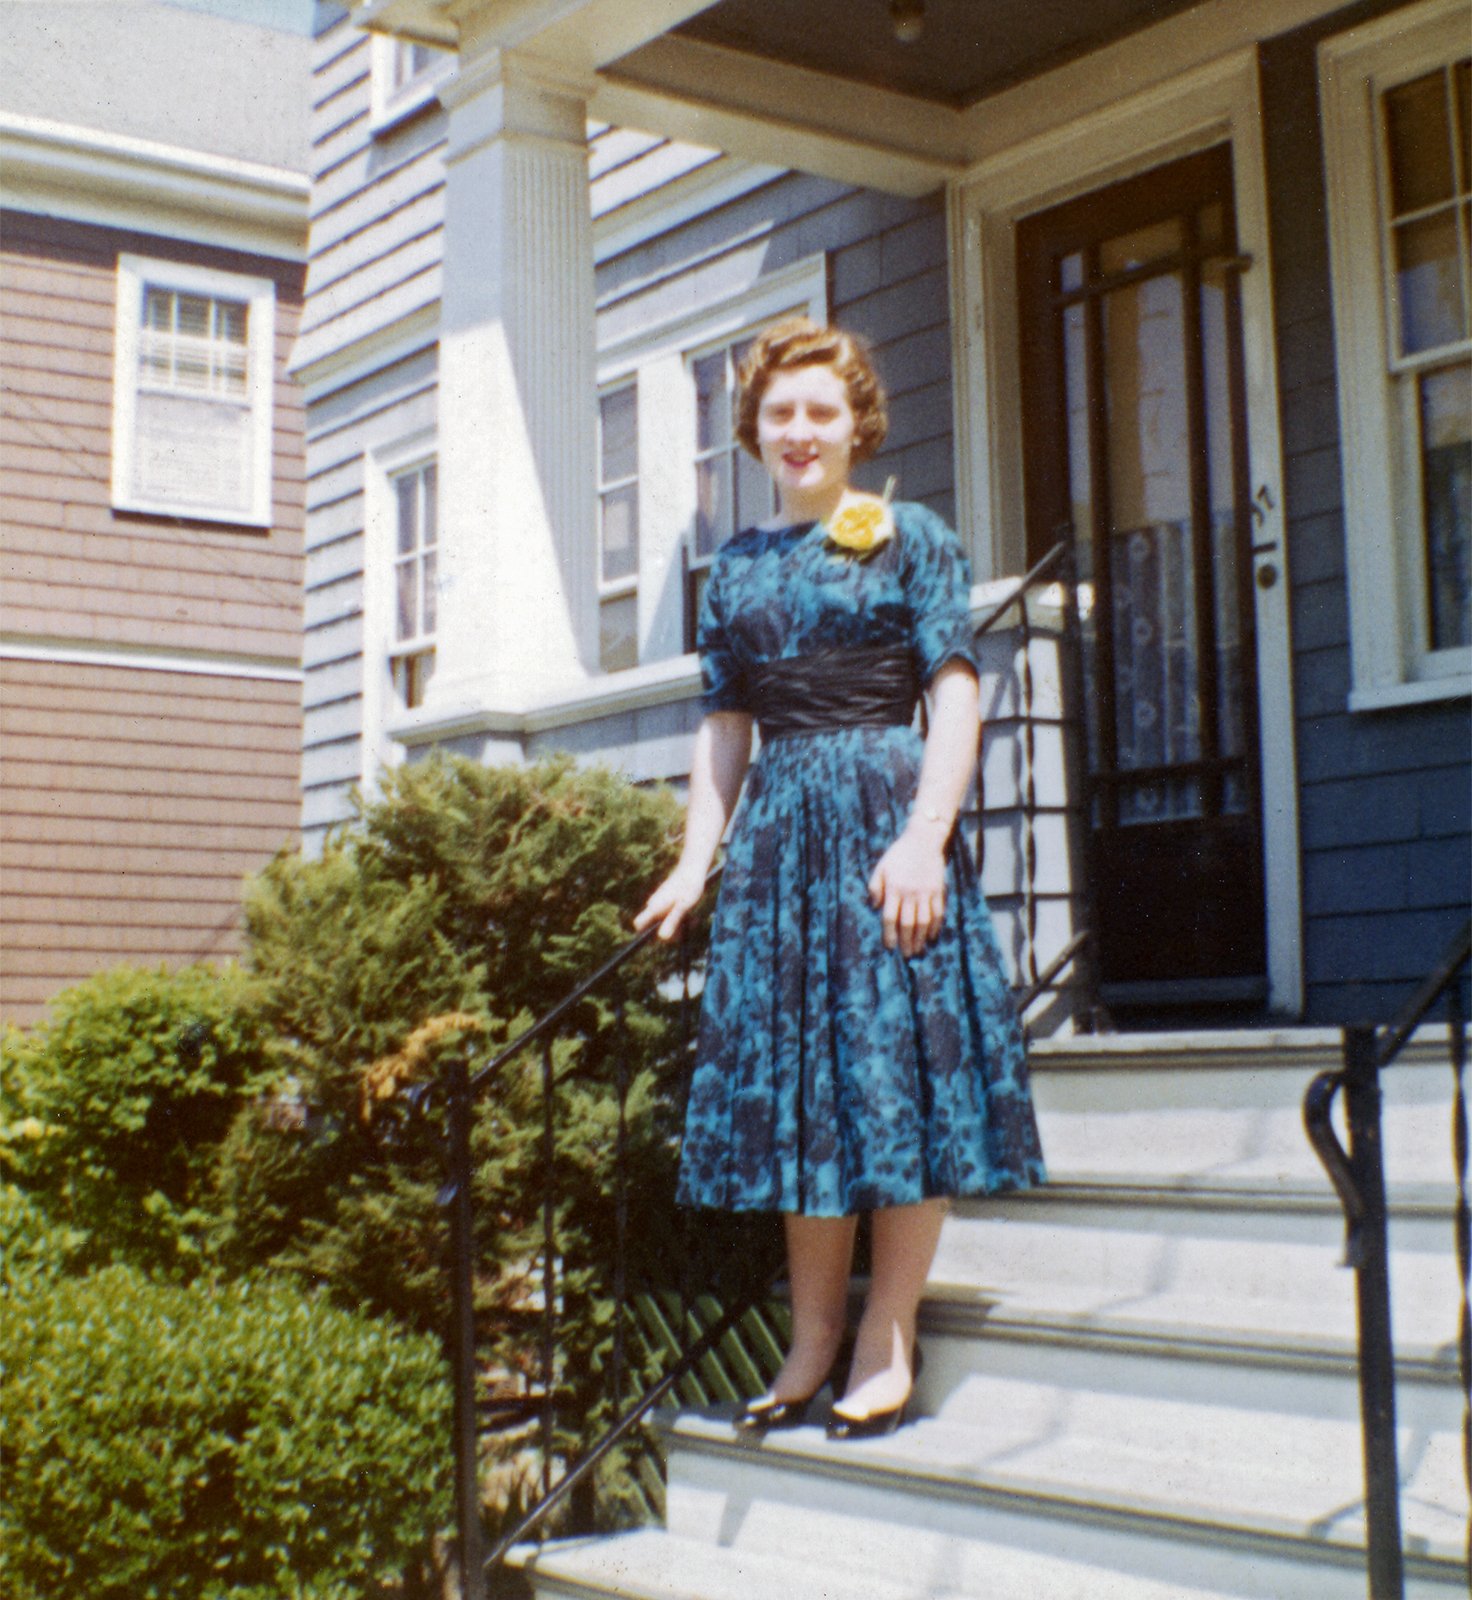 Maureen Dwyer (Mike’s sister) outside her aunt’s house in Dorchester, Massachusetts, May 1958.